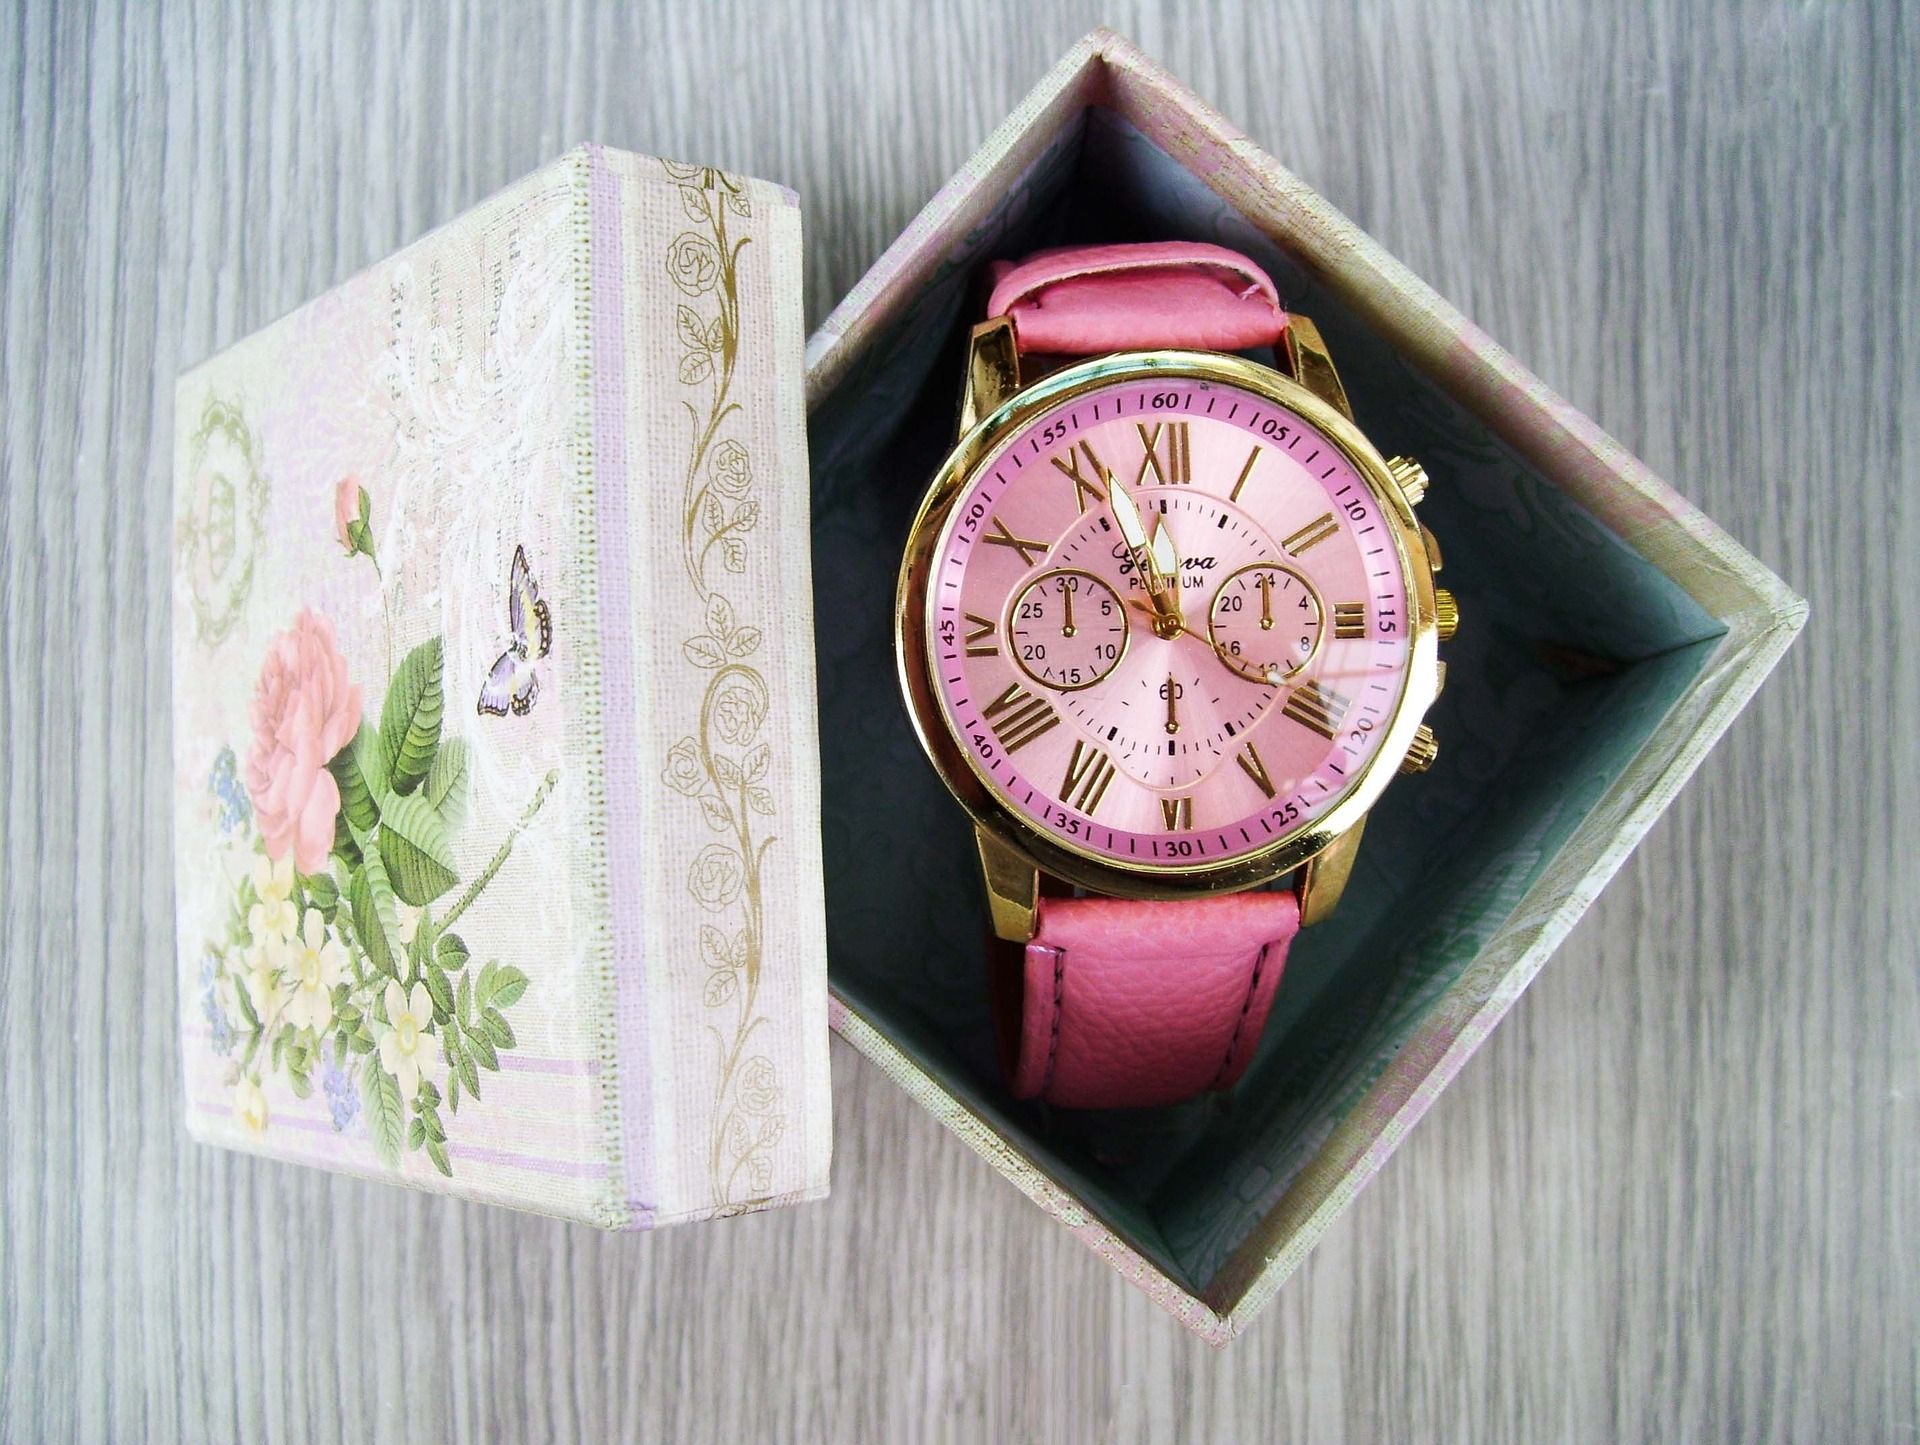 Small gift box with flowers and butterflies. Lid is open to reveal pink and gold wrist watch.